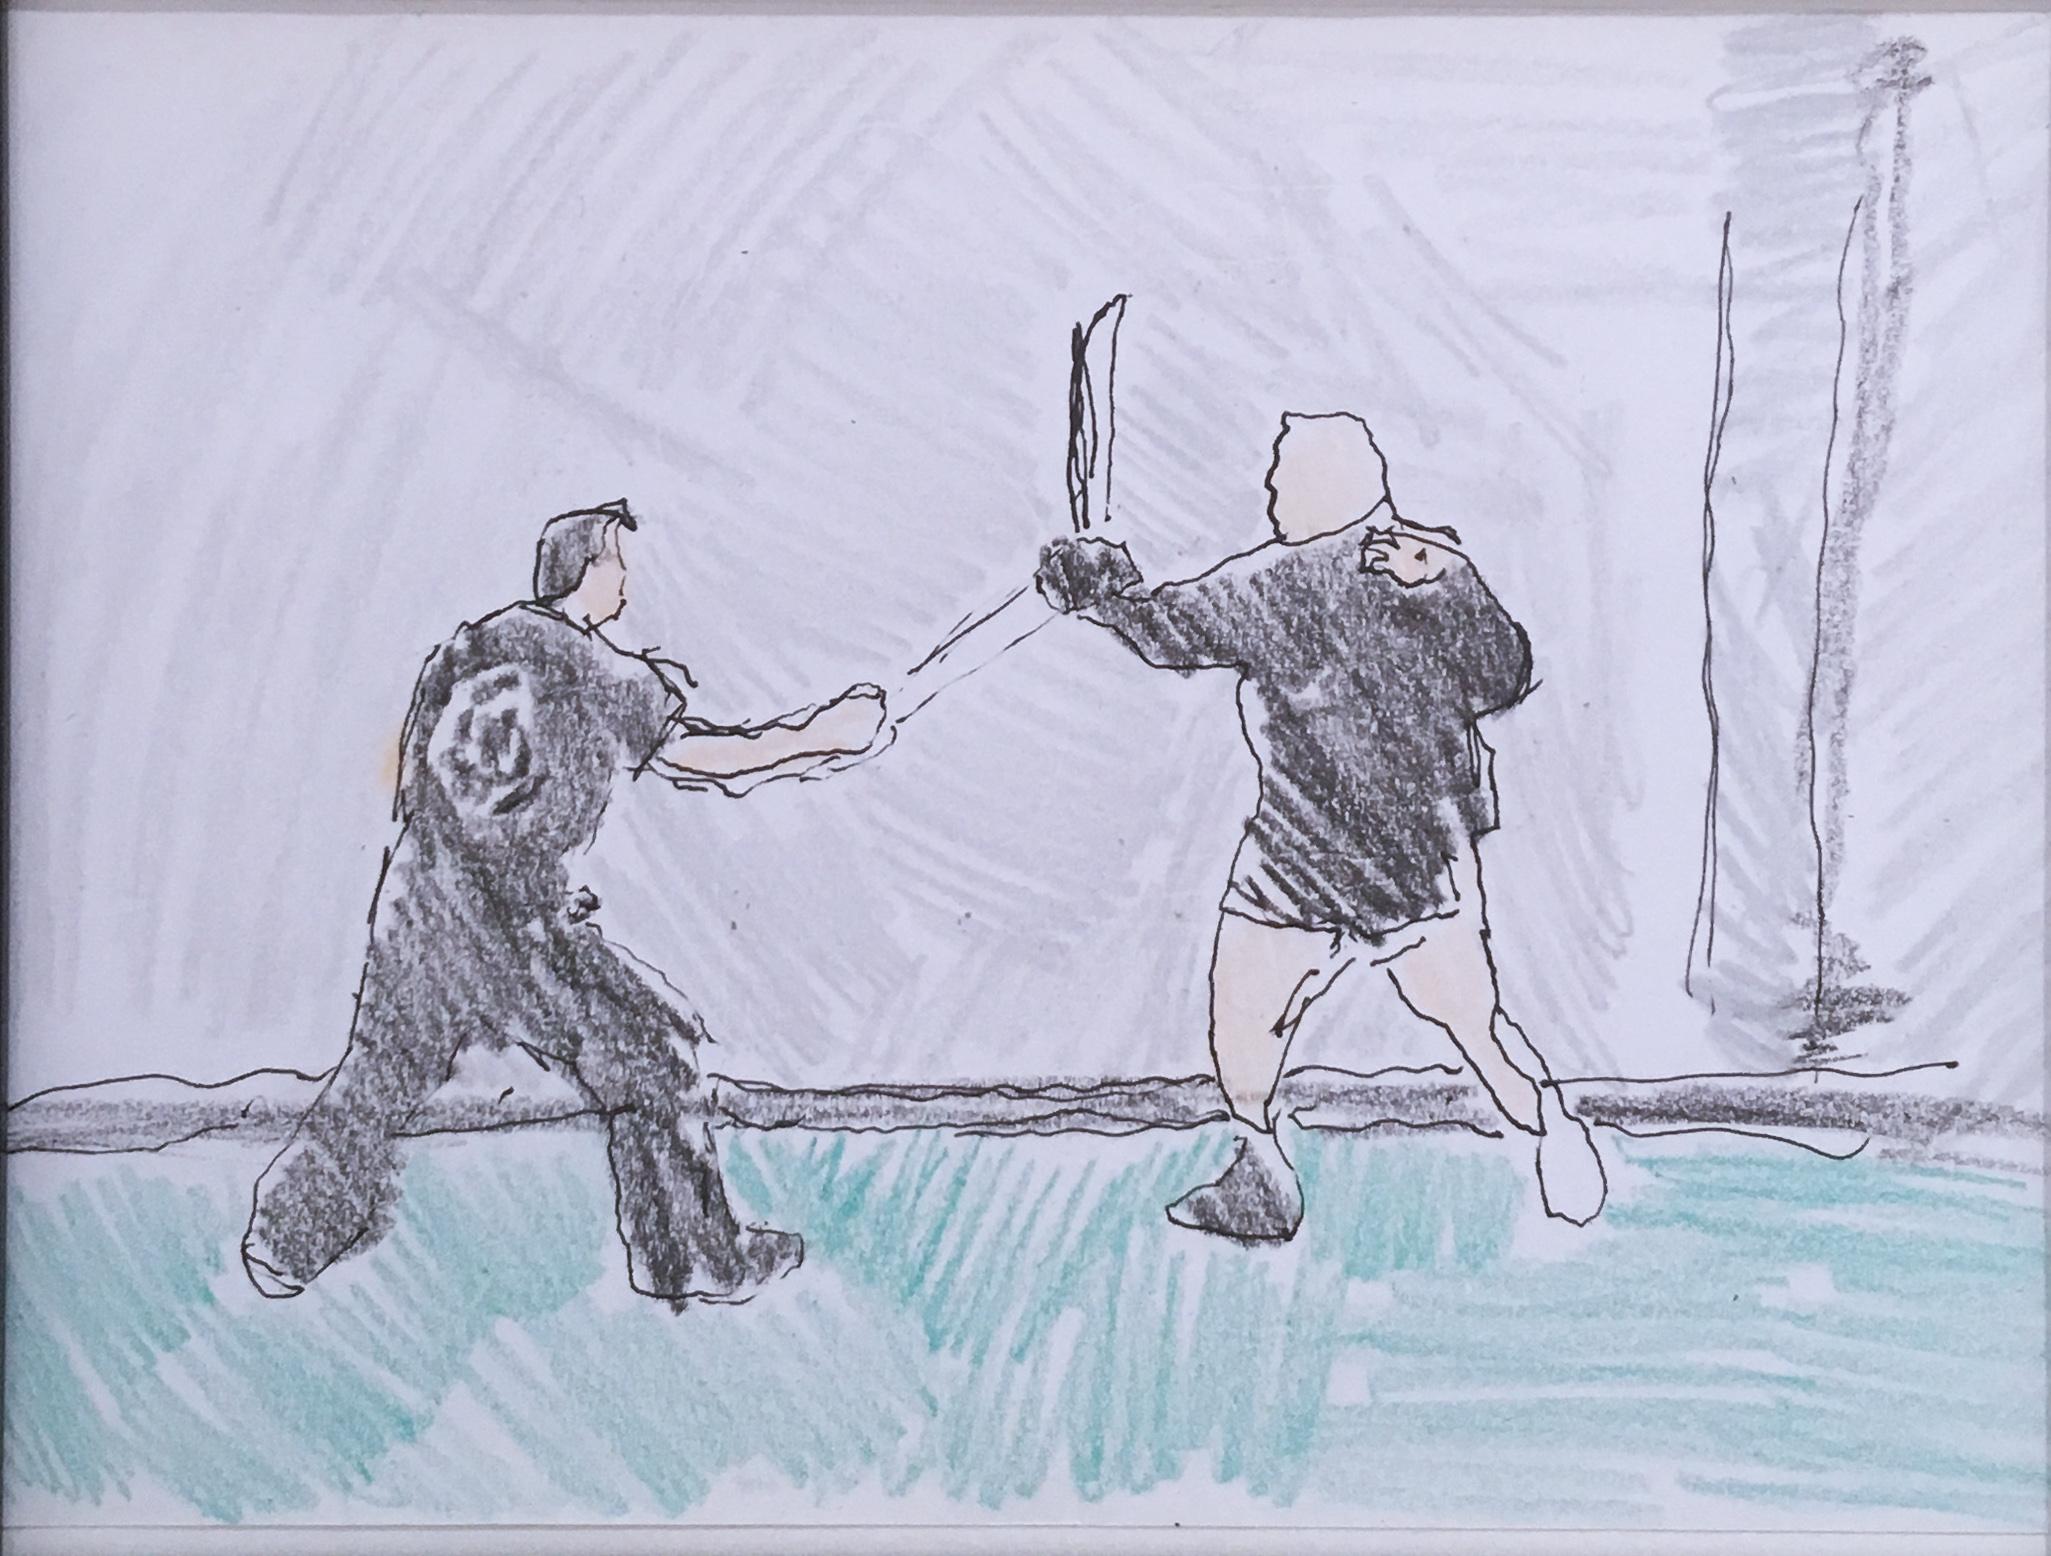 Sword Fight, 2018, pen and crayon on paper, figurative, drawing, framed - Painting by Macauley Norman